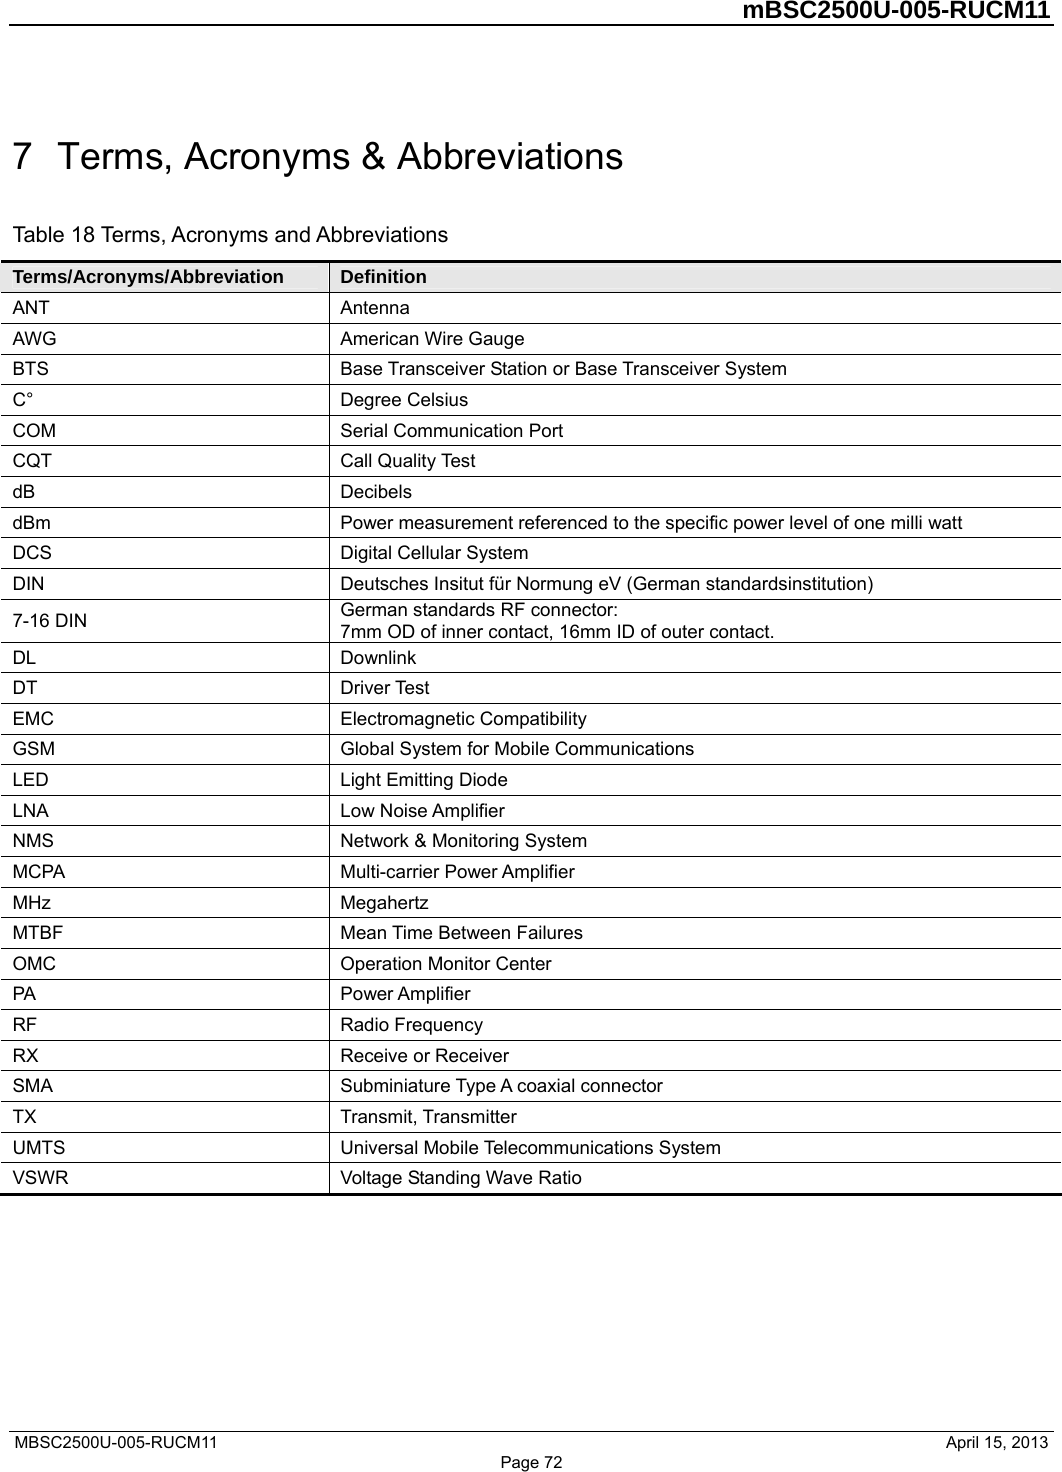         mBSC2500U-005-RUCM11   MBSC2500U-005-RUCM11                                April 15, 2013 Page 72 7  Terms, Acronyms &amp; Abbreviations Table 18 Terms, Acronyms and Abbreviations Terms/Acronyms/Abbreviation  Definition ANT Antenna AWG  American Wire Gauge BTS  Base Transceiver Station or Base Transceiver System C° Degree Celsius COM  Serial Communication Port CQT Call Quality Test dB Decibels dBm  Power measurement referenced to the specific power level of one milli watt DCS Digital Cellular System DIN  Deutsches Insitut für Normung eV (German standardsinstitution) 7-16 DIN  German standards RF connector: 7mm OD of inner contact, 16mm ID of outer contact. DL Downlink DT Driver Test EMC Electromagnetic Compatibility GSM  Global System for Mobile Communications LED  Light Emitting Diode LNA Low Noise Amplifier NMS  Network &amp; Monitoring System MCPA Multi-carrier Power Amplifier MHz Megahertz MTBF  Mean Time Between Failures OMC  Operation Monitor Center PA Power Amplifier RF Radio Frequency RX  Receive or Receiver SMA  Subminiature Type A coaxial connector TX Transmit, Transmitter UMTS  Universal Mobile Telecommunications System VSWR  Voltage Standing Wave Ratio        